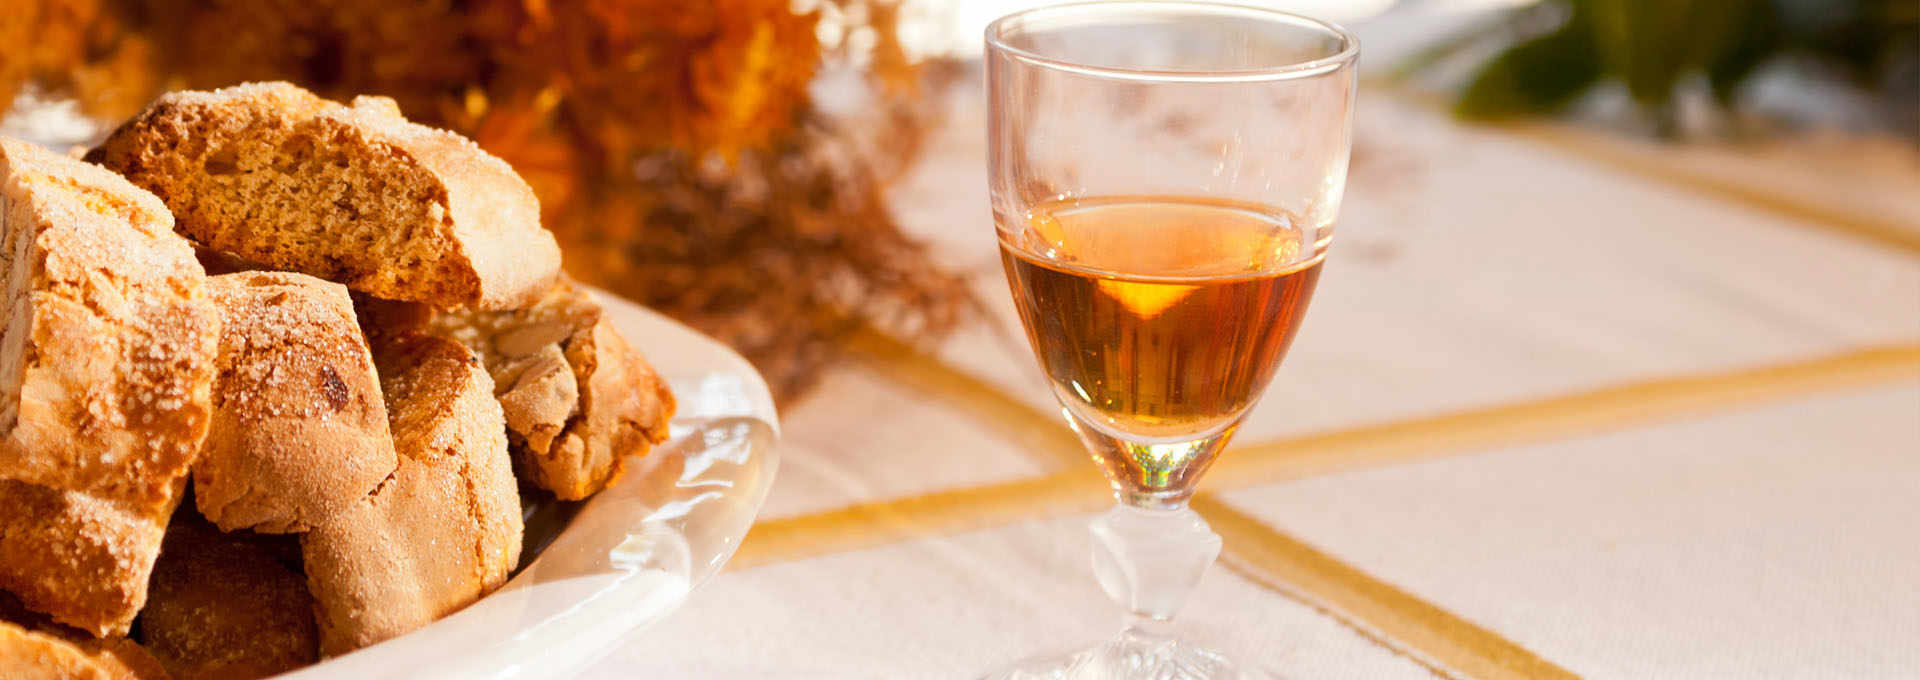 Vin Santo: Crystal Clear and Golden